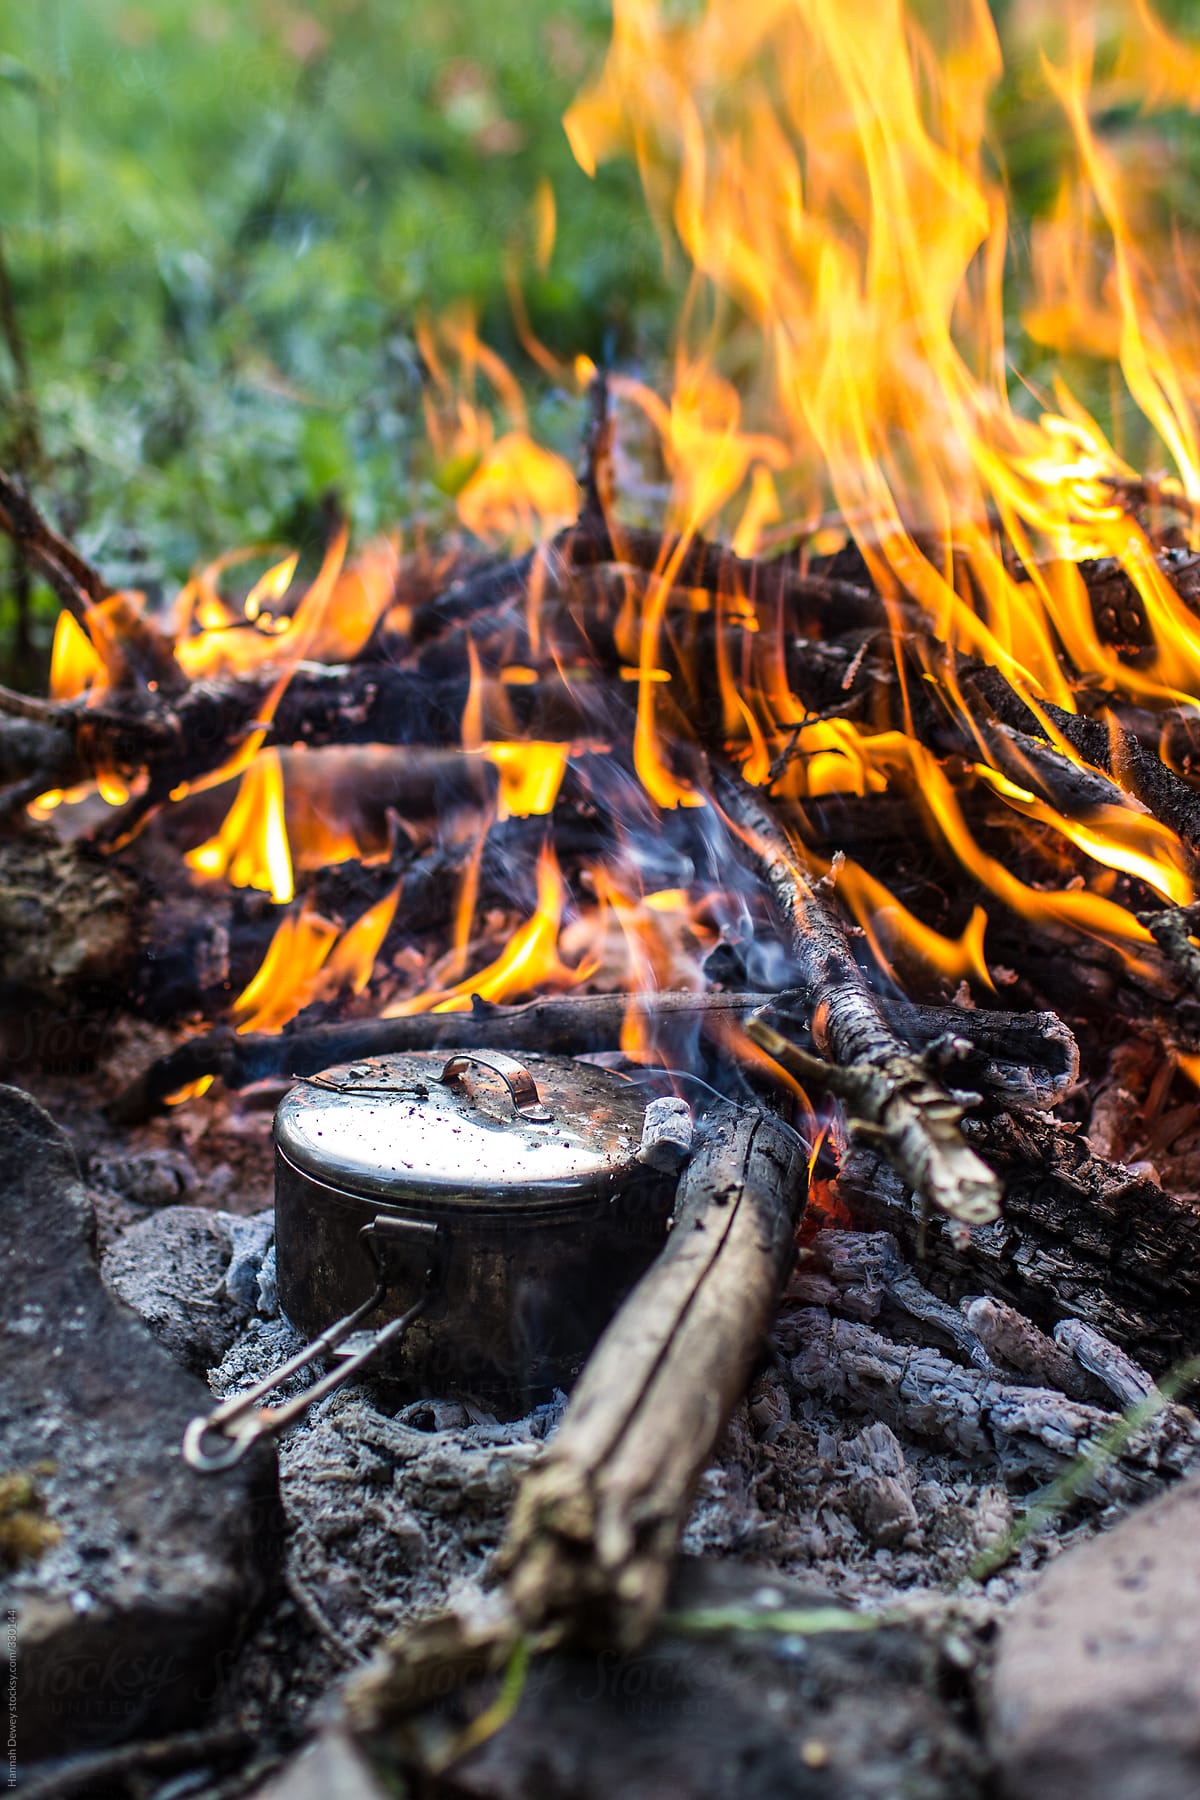 A meal cooks in a metal pot over a campfire